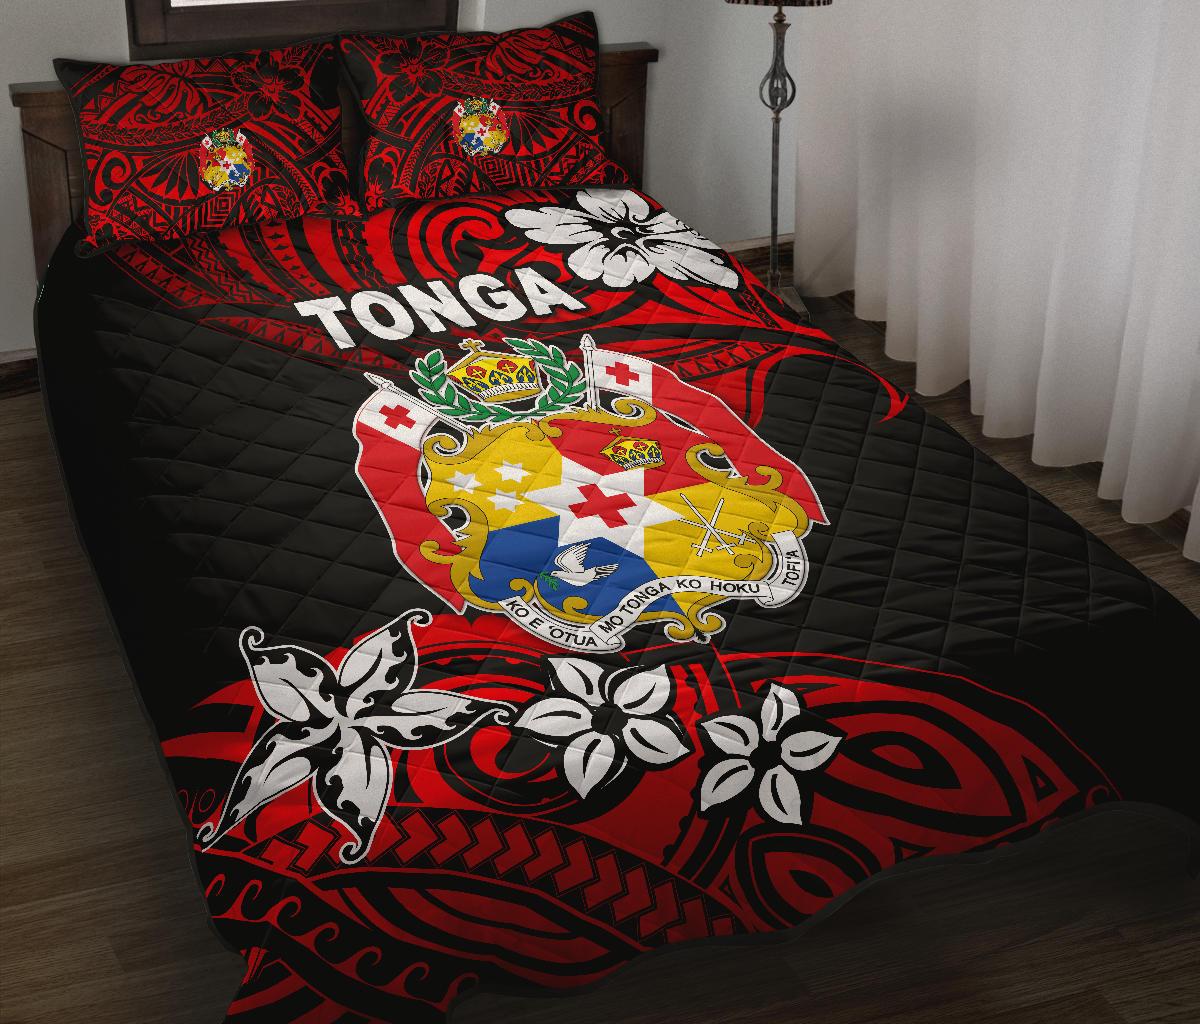 Mate Ma'a Tonga Rugby Quilt Bed Set Polynesian Unique Vibes - Red Red - Polynesian Pride